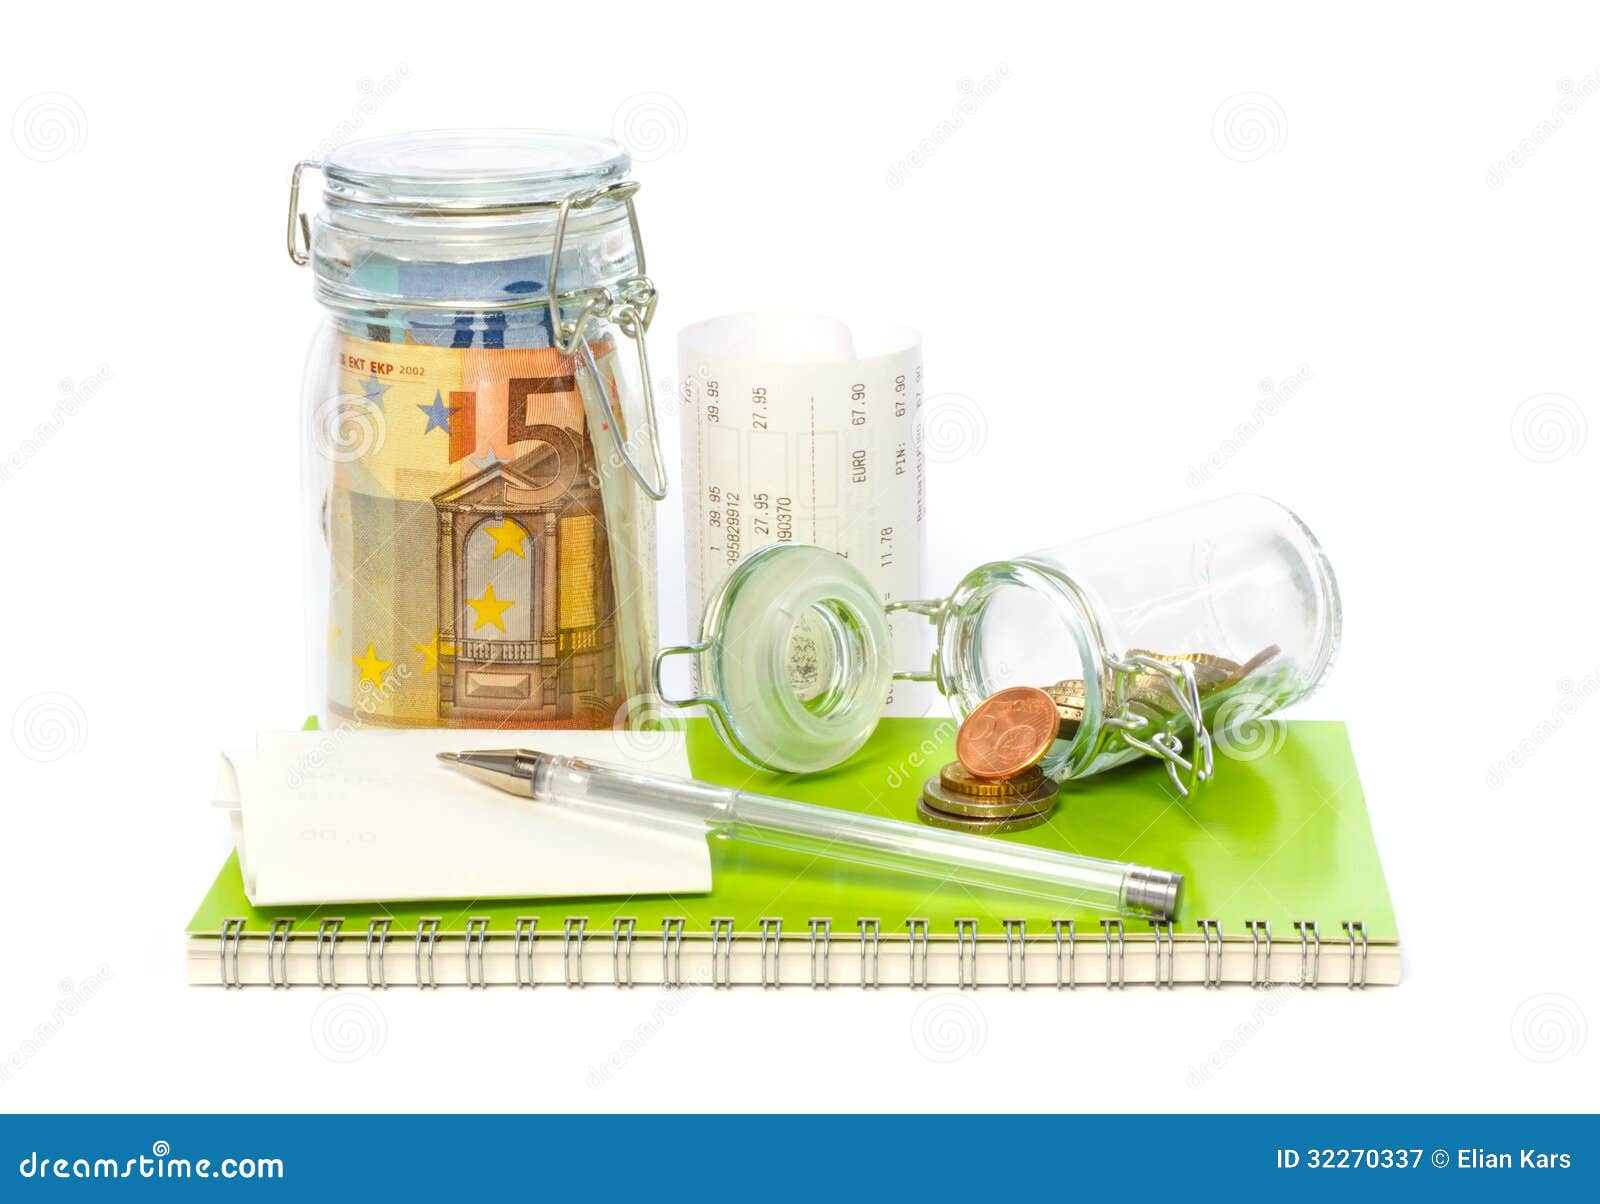 savings on the expenditure book with receipts and pen